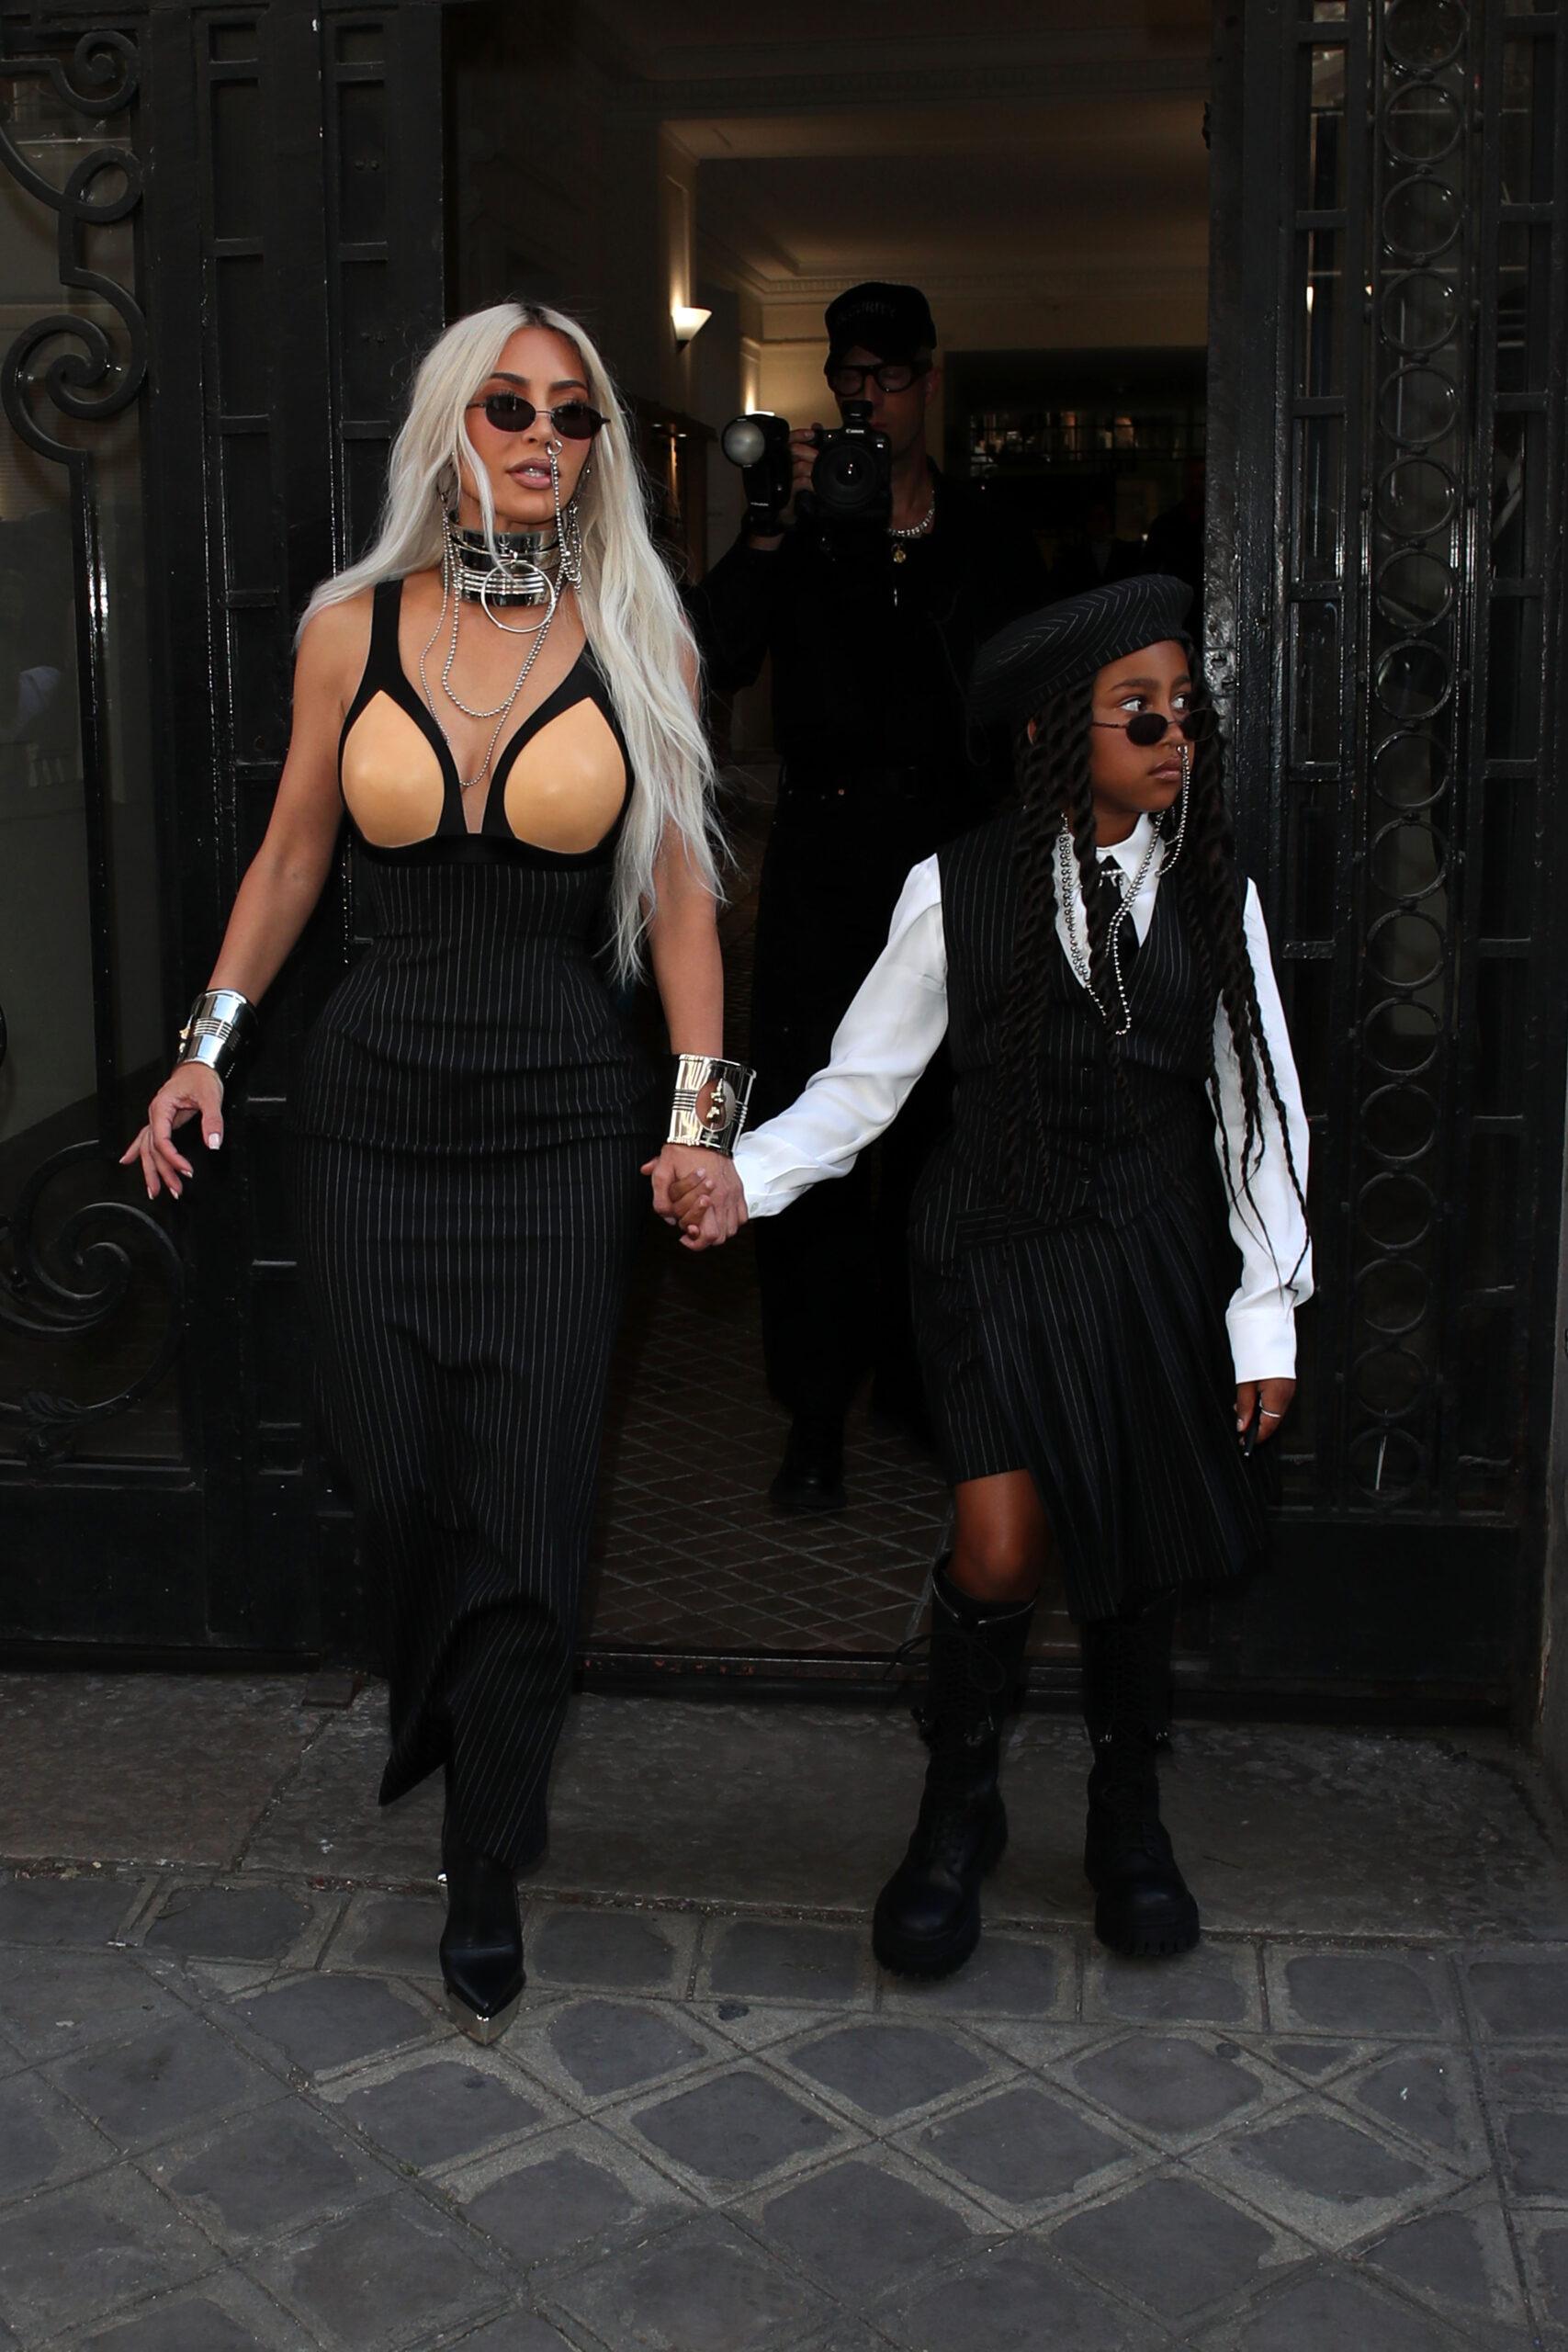 Kim Kardashian and daughter North West leave the Jean Paul Gaultier fashion show in Paris.